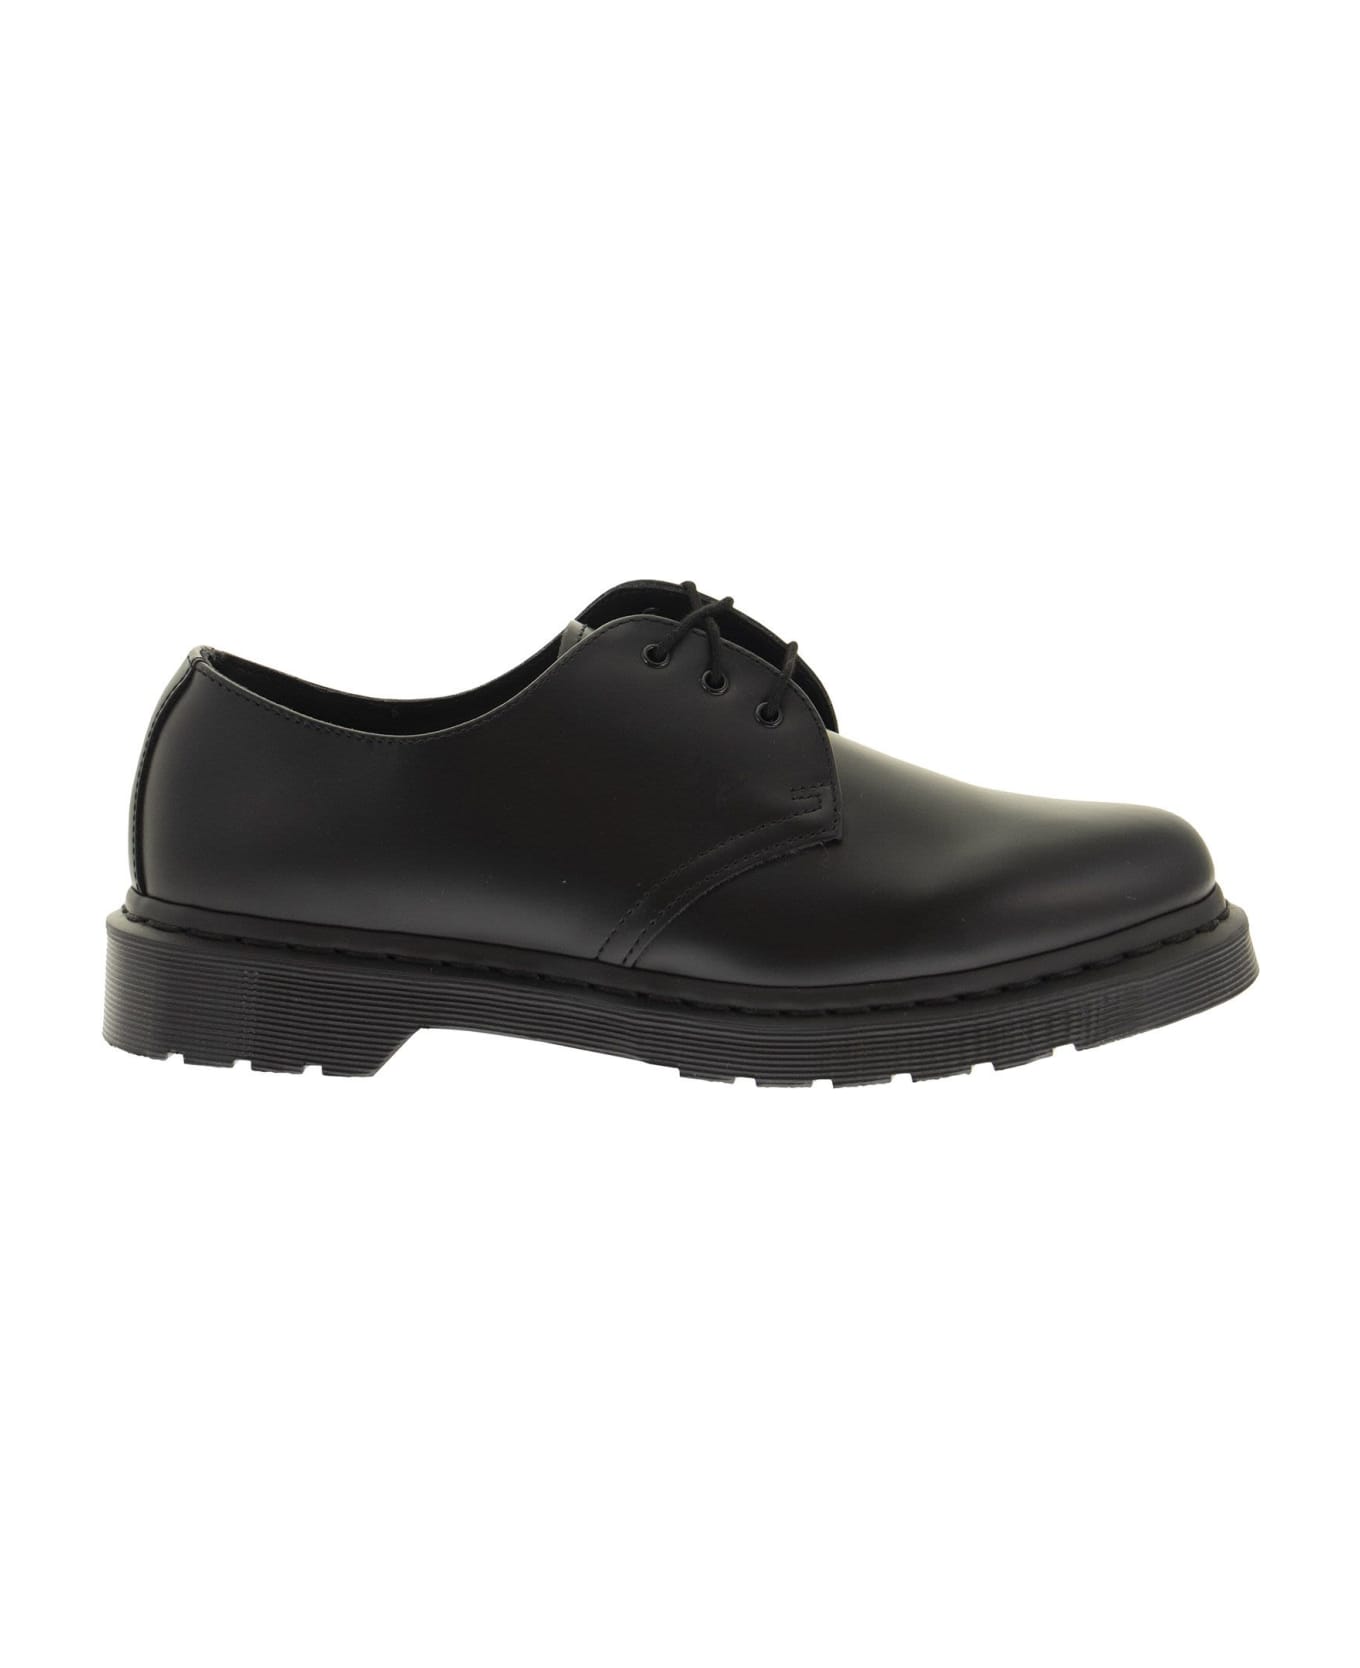 Dr. Martens 1461 Mono - Leather Lace-up - Black ローファー＆デッキシューズ